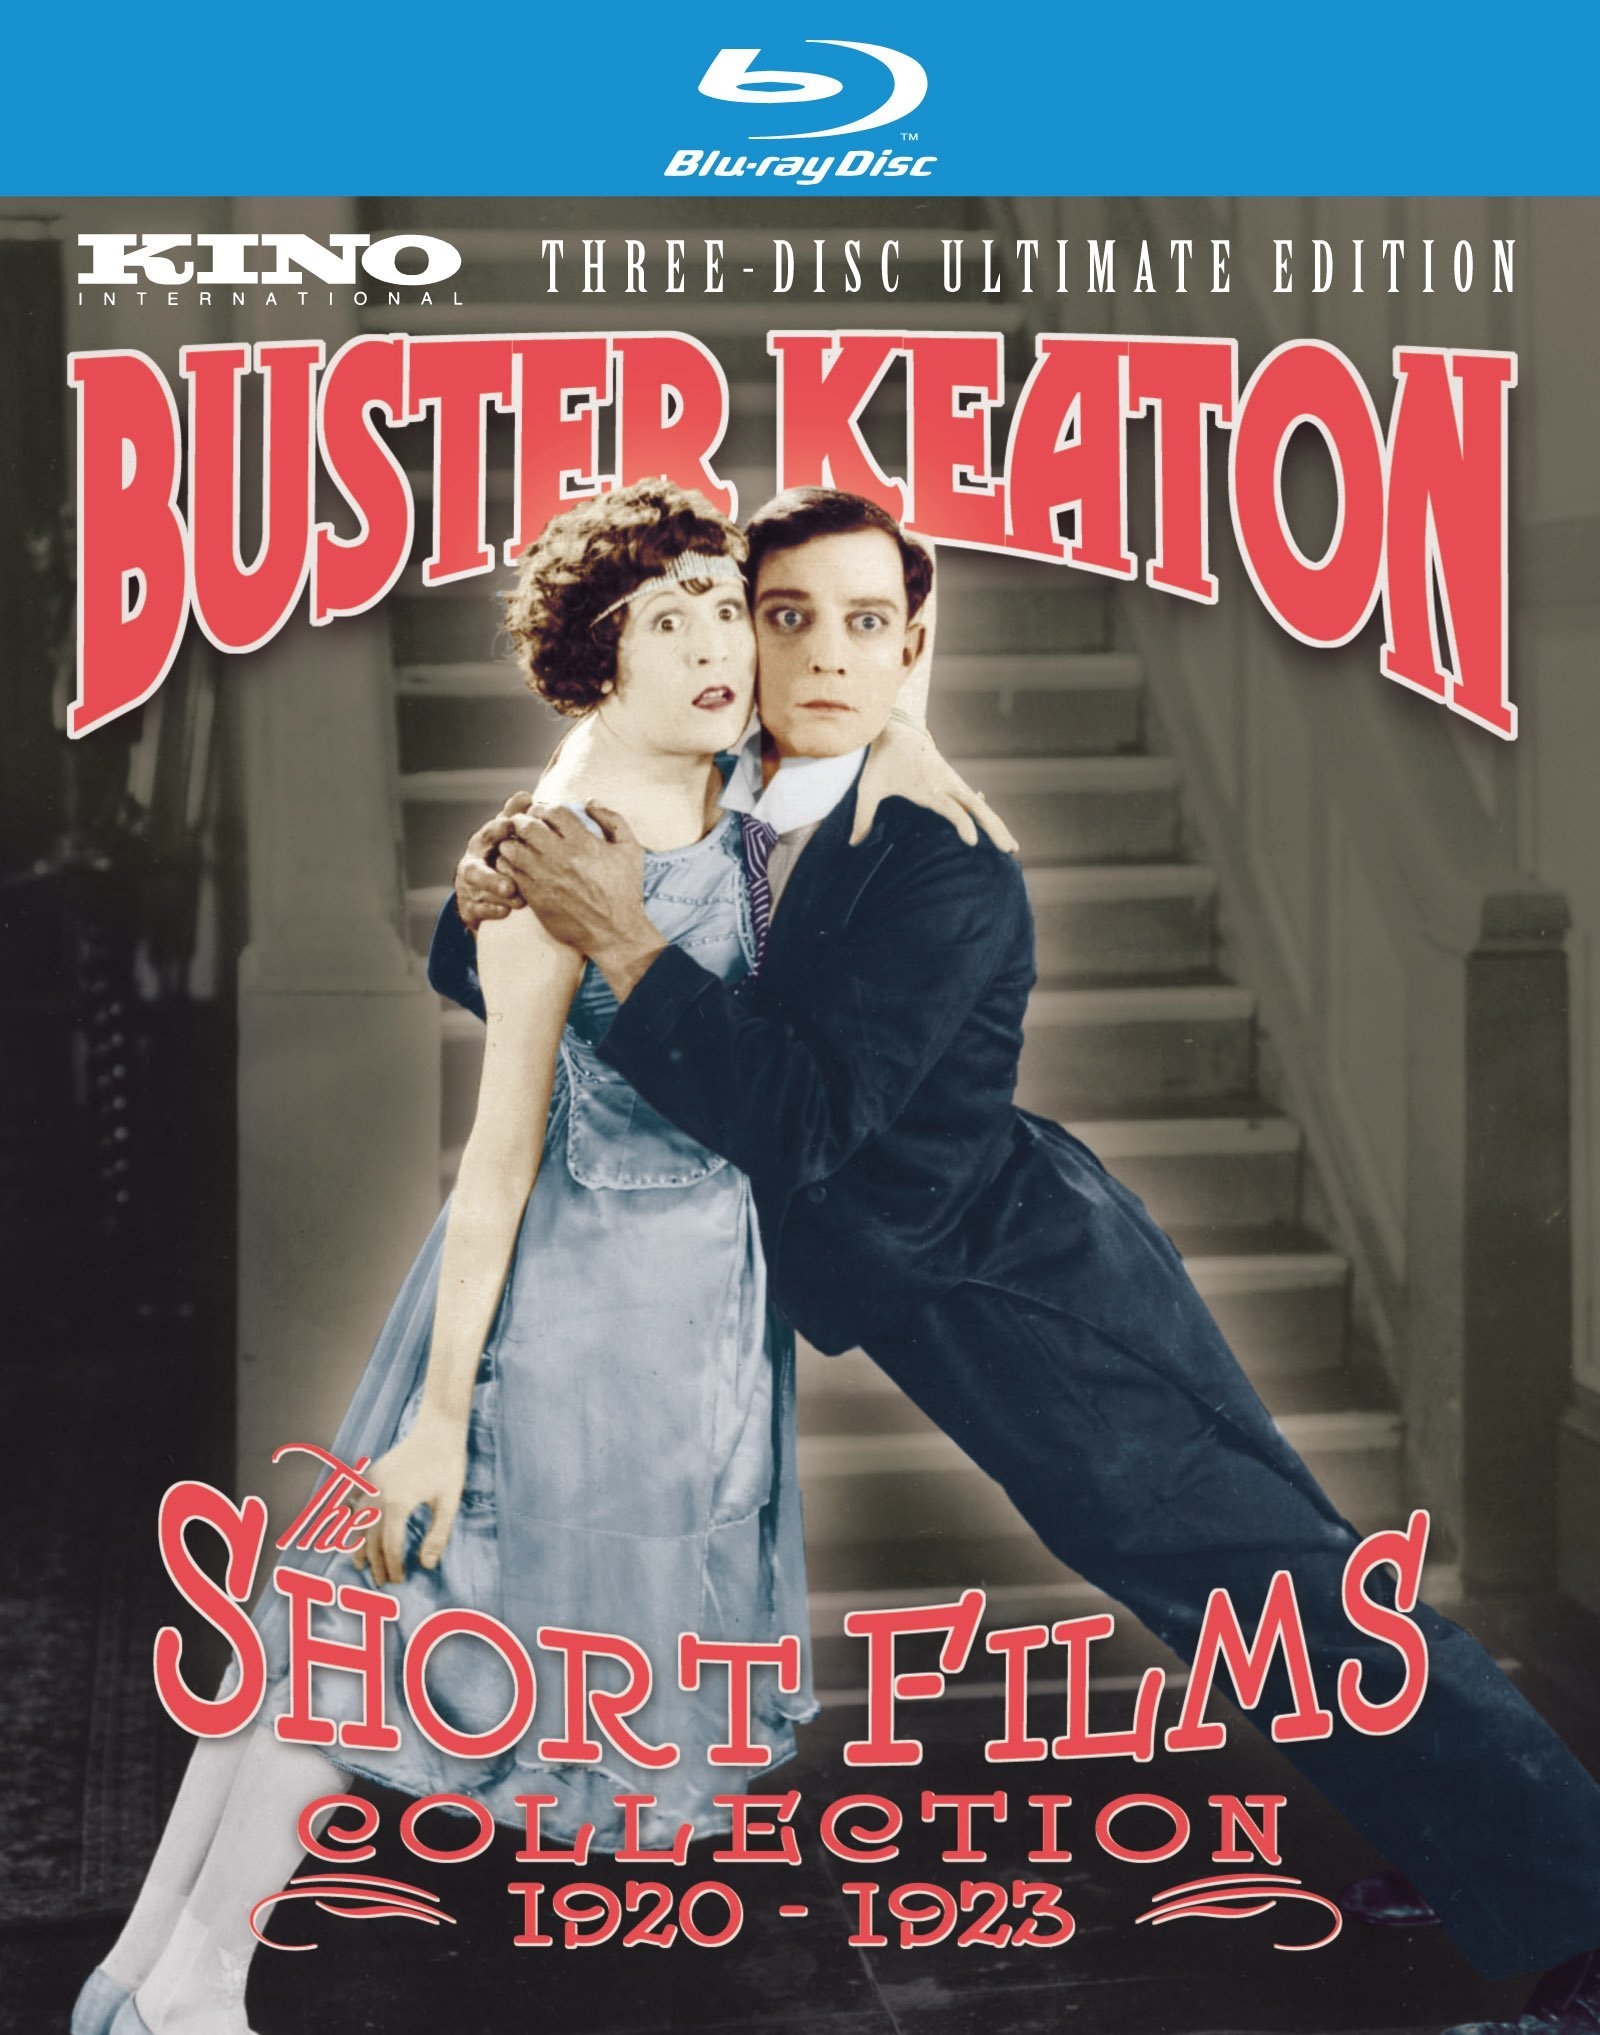 Short films collection. Husbands the Criterion collection.